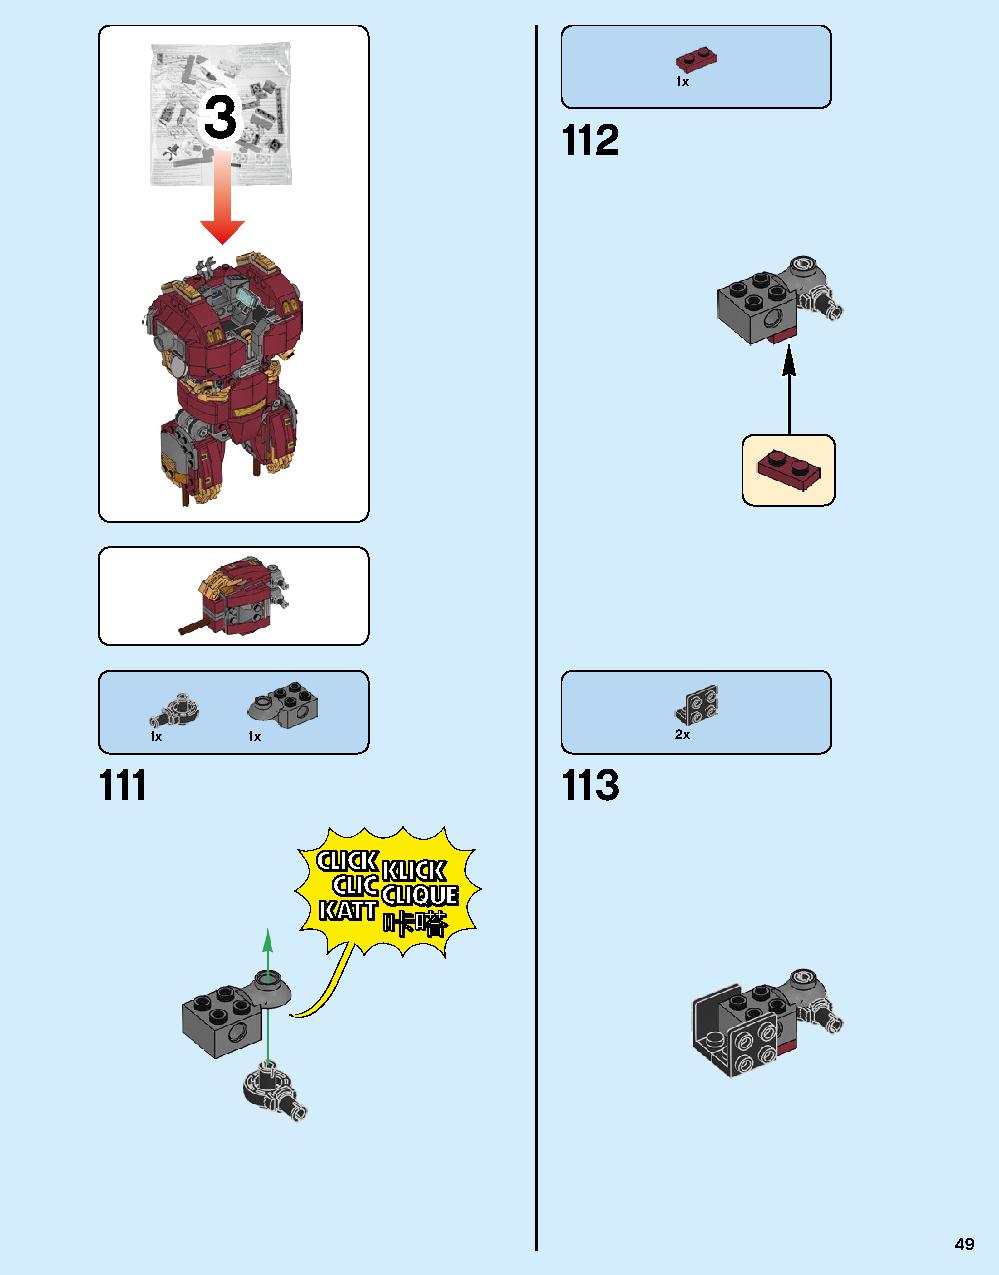 The Hulkbuster: Ultron Edition 76105 LEGO information LEGO instructions 49 page